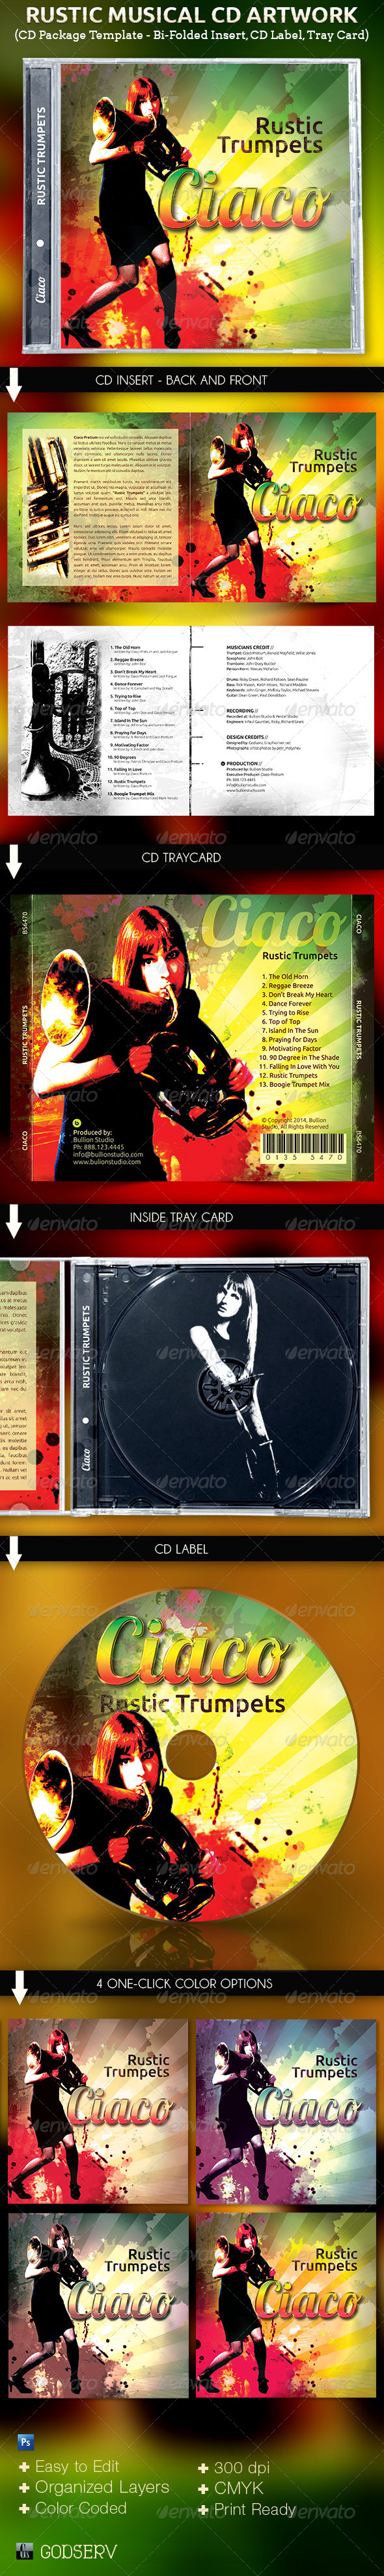 Rustic-Musical-Cd-Template-Preview